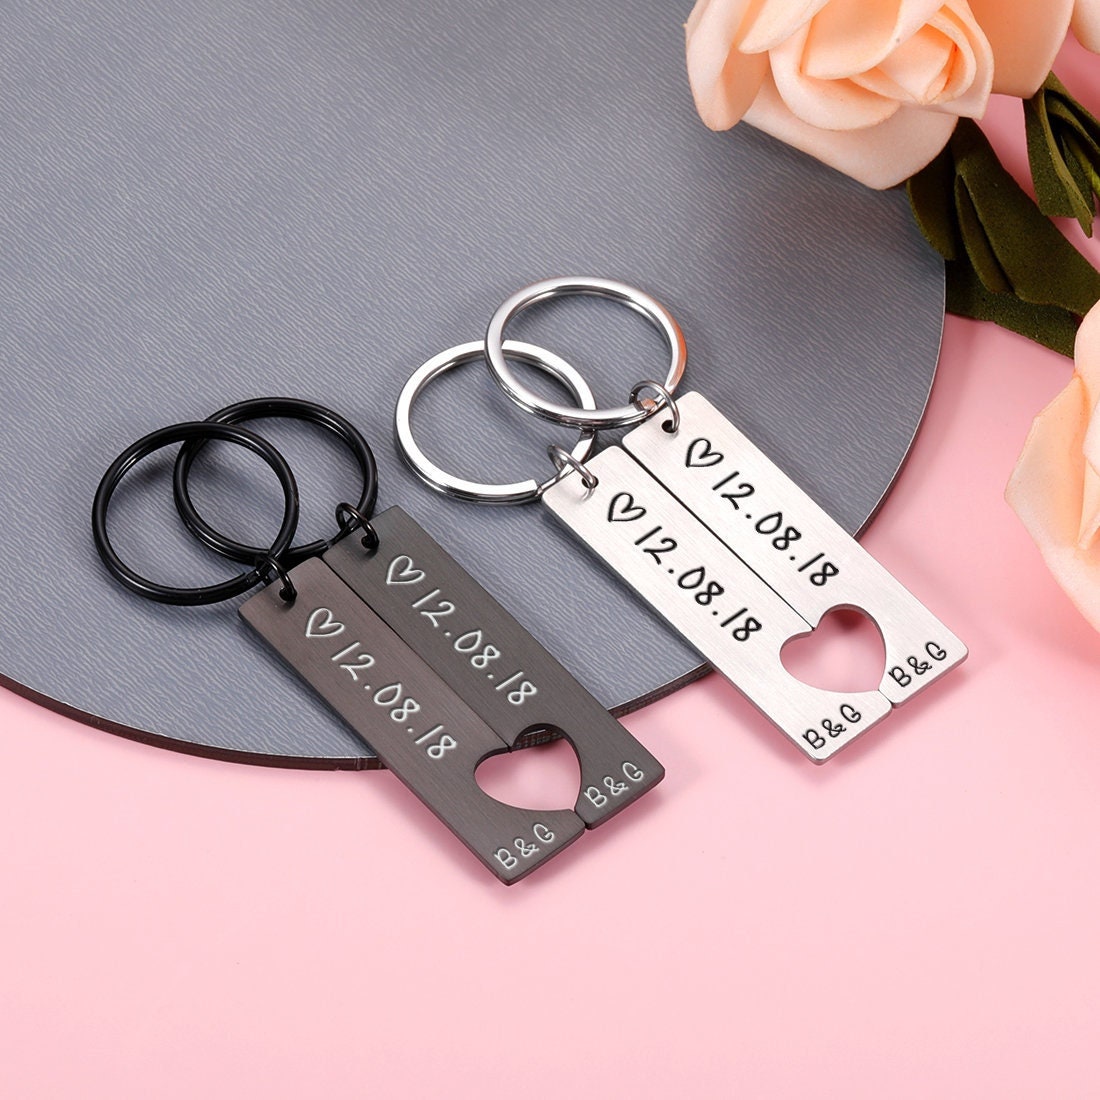 Fleure Esme Matching Couples Stuff Gifts for Boyfriend Girlfriend  Valentines Day Gifts for Him Husband Wife Couple Keychain